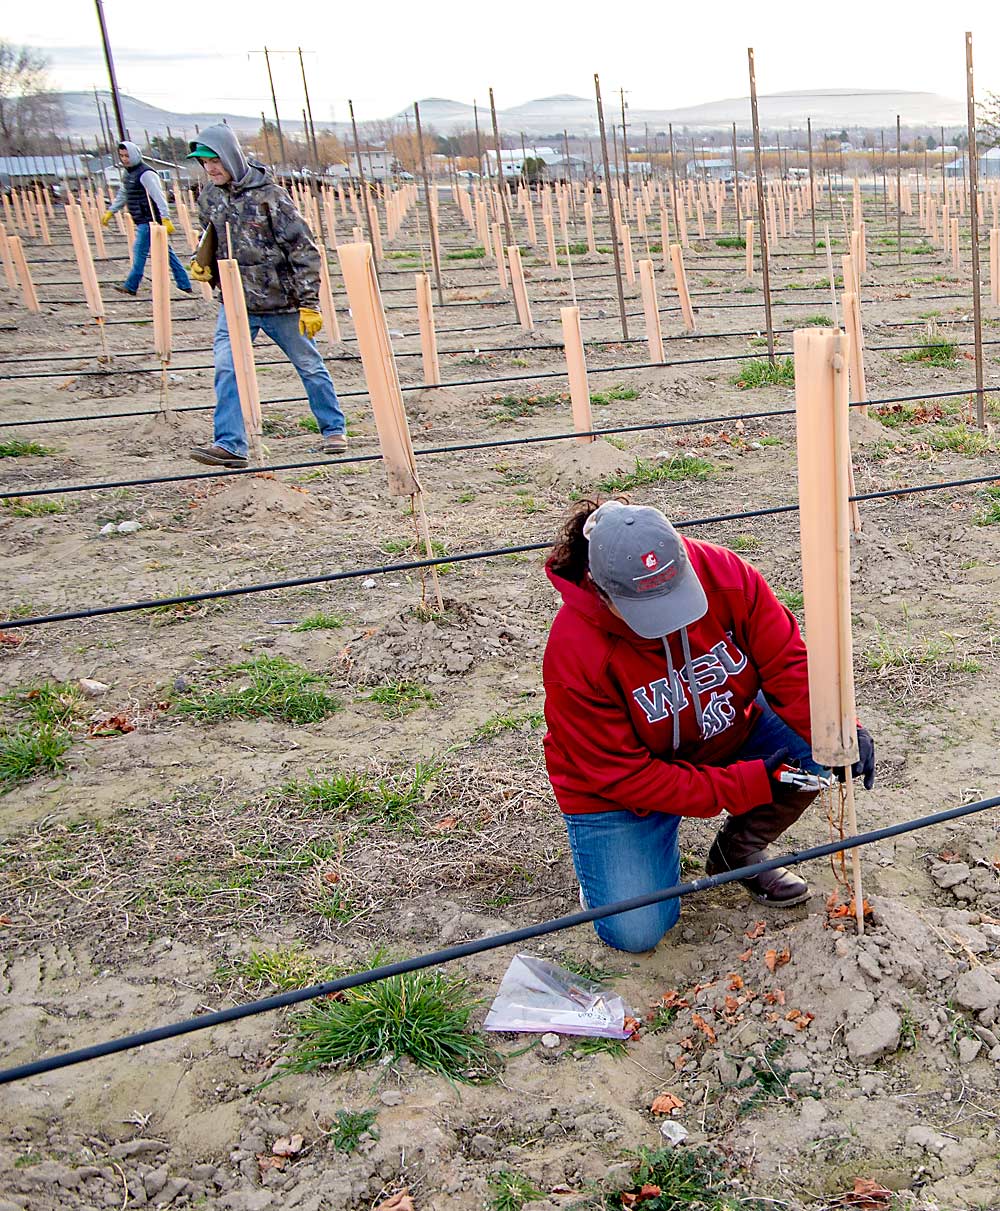 While Mireles snips sections for cold hardiness tests, Dawson Daniels, center, and Mizael Mendoza of Inland Desert Nursery prep for her by lifting grow tubes. (Ross Courtney/Good Fruit Grower)